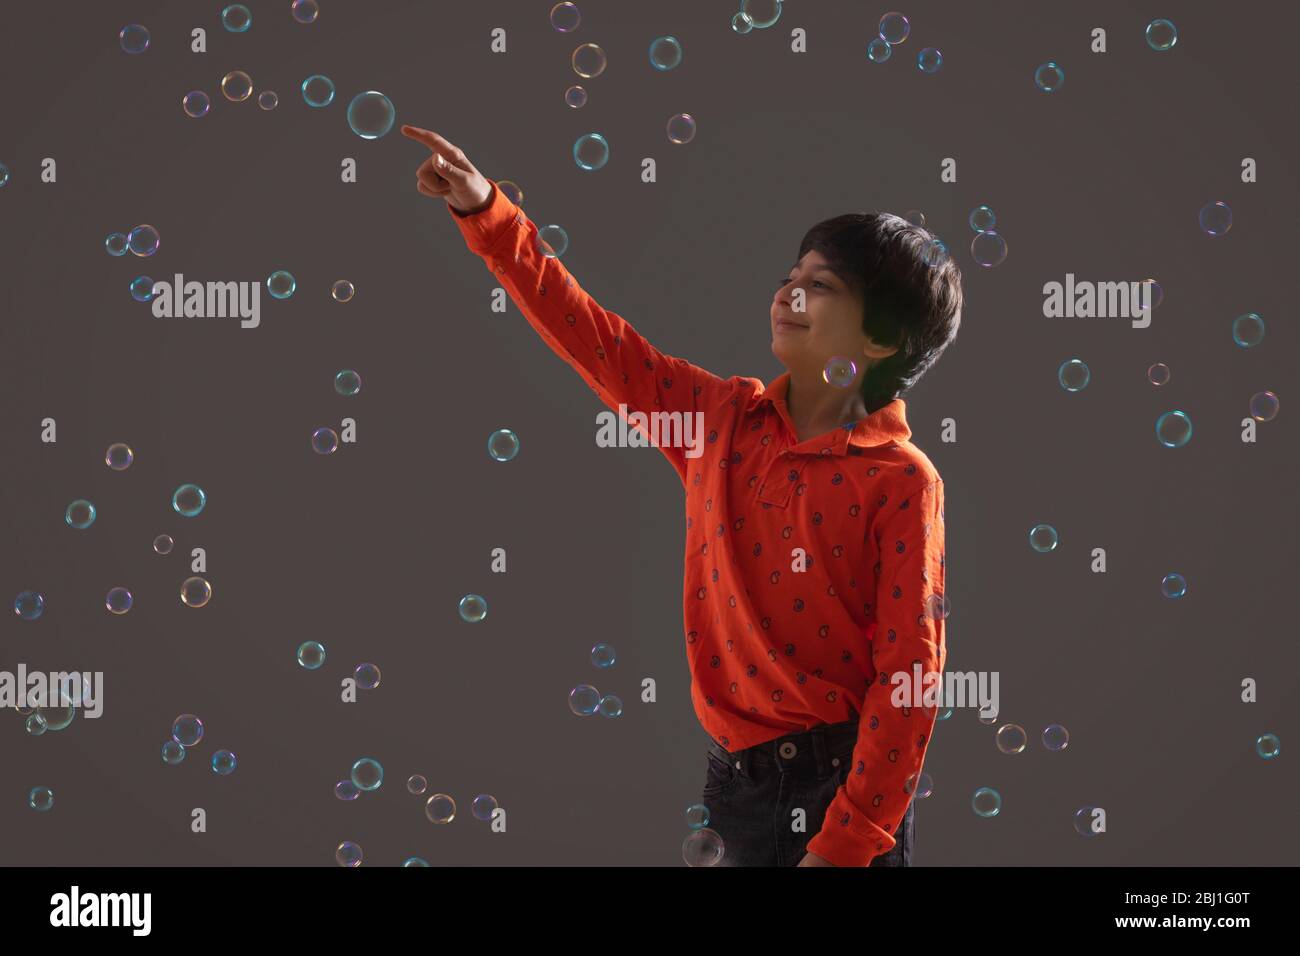 portrait of a young boy popping a bubble Stock Photo